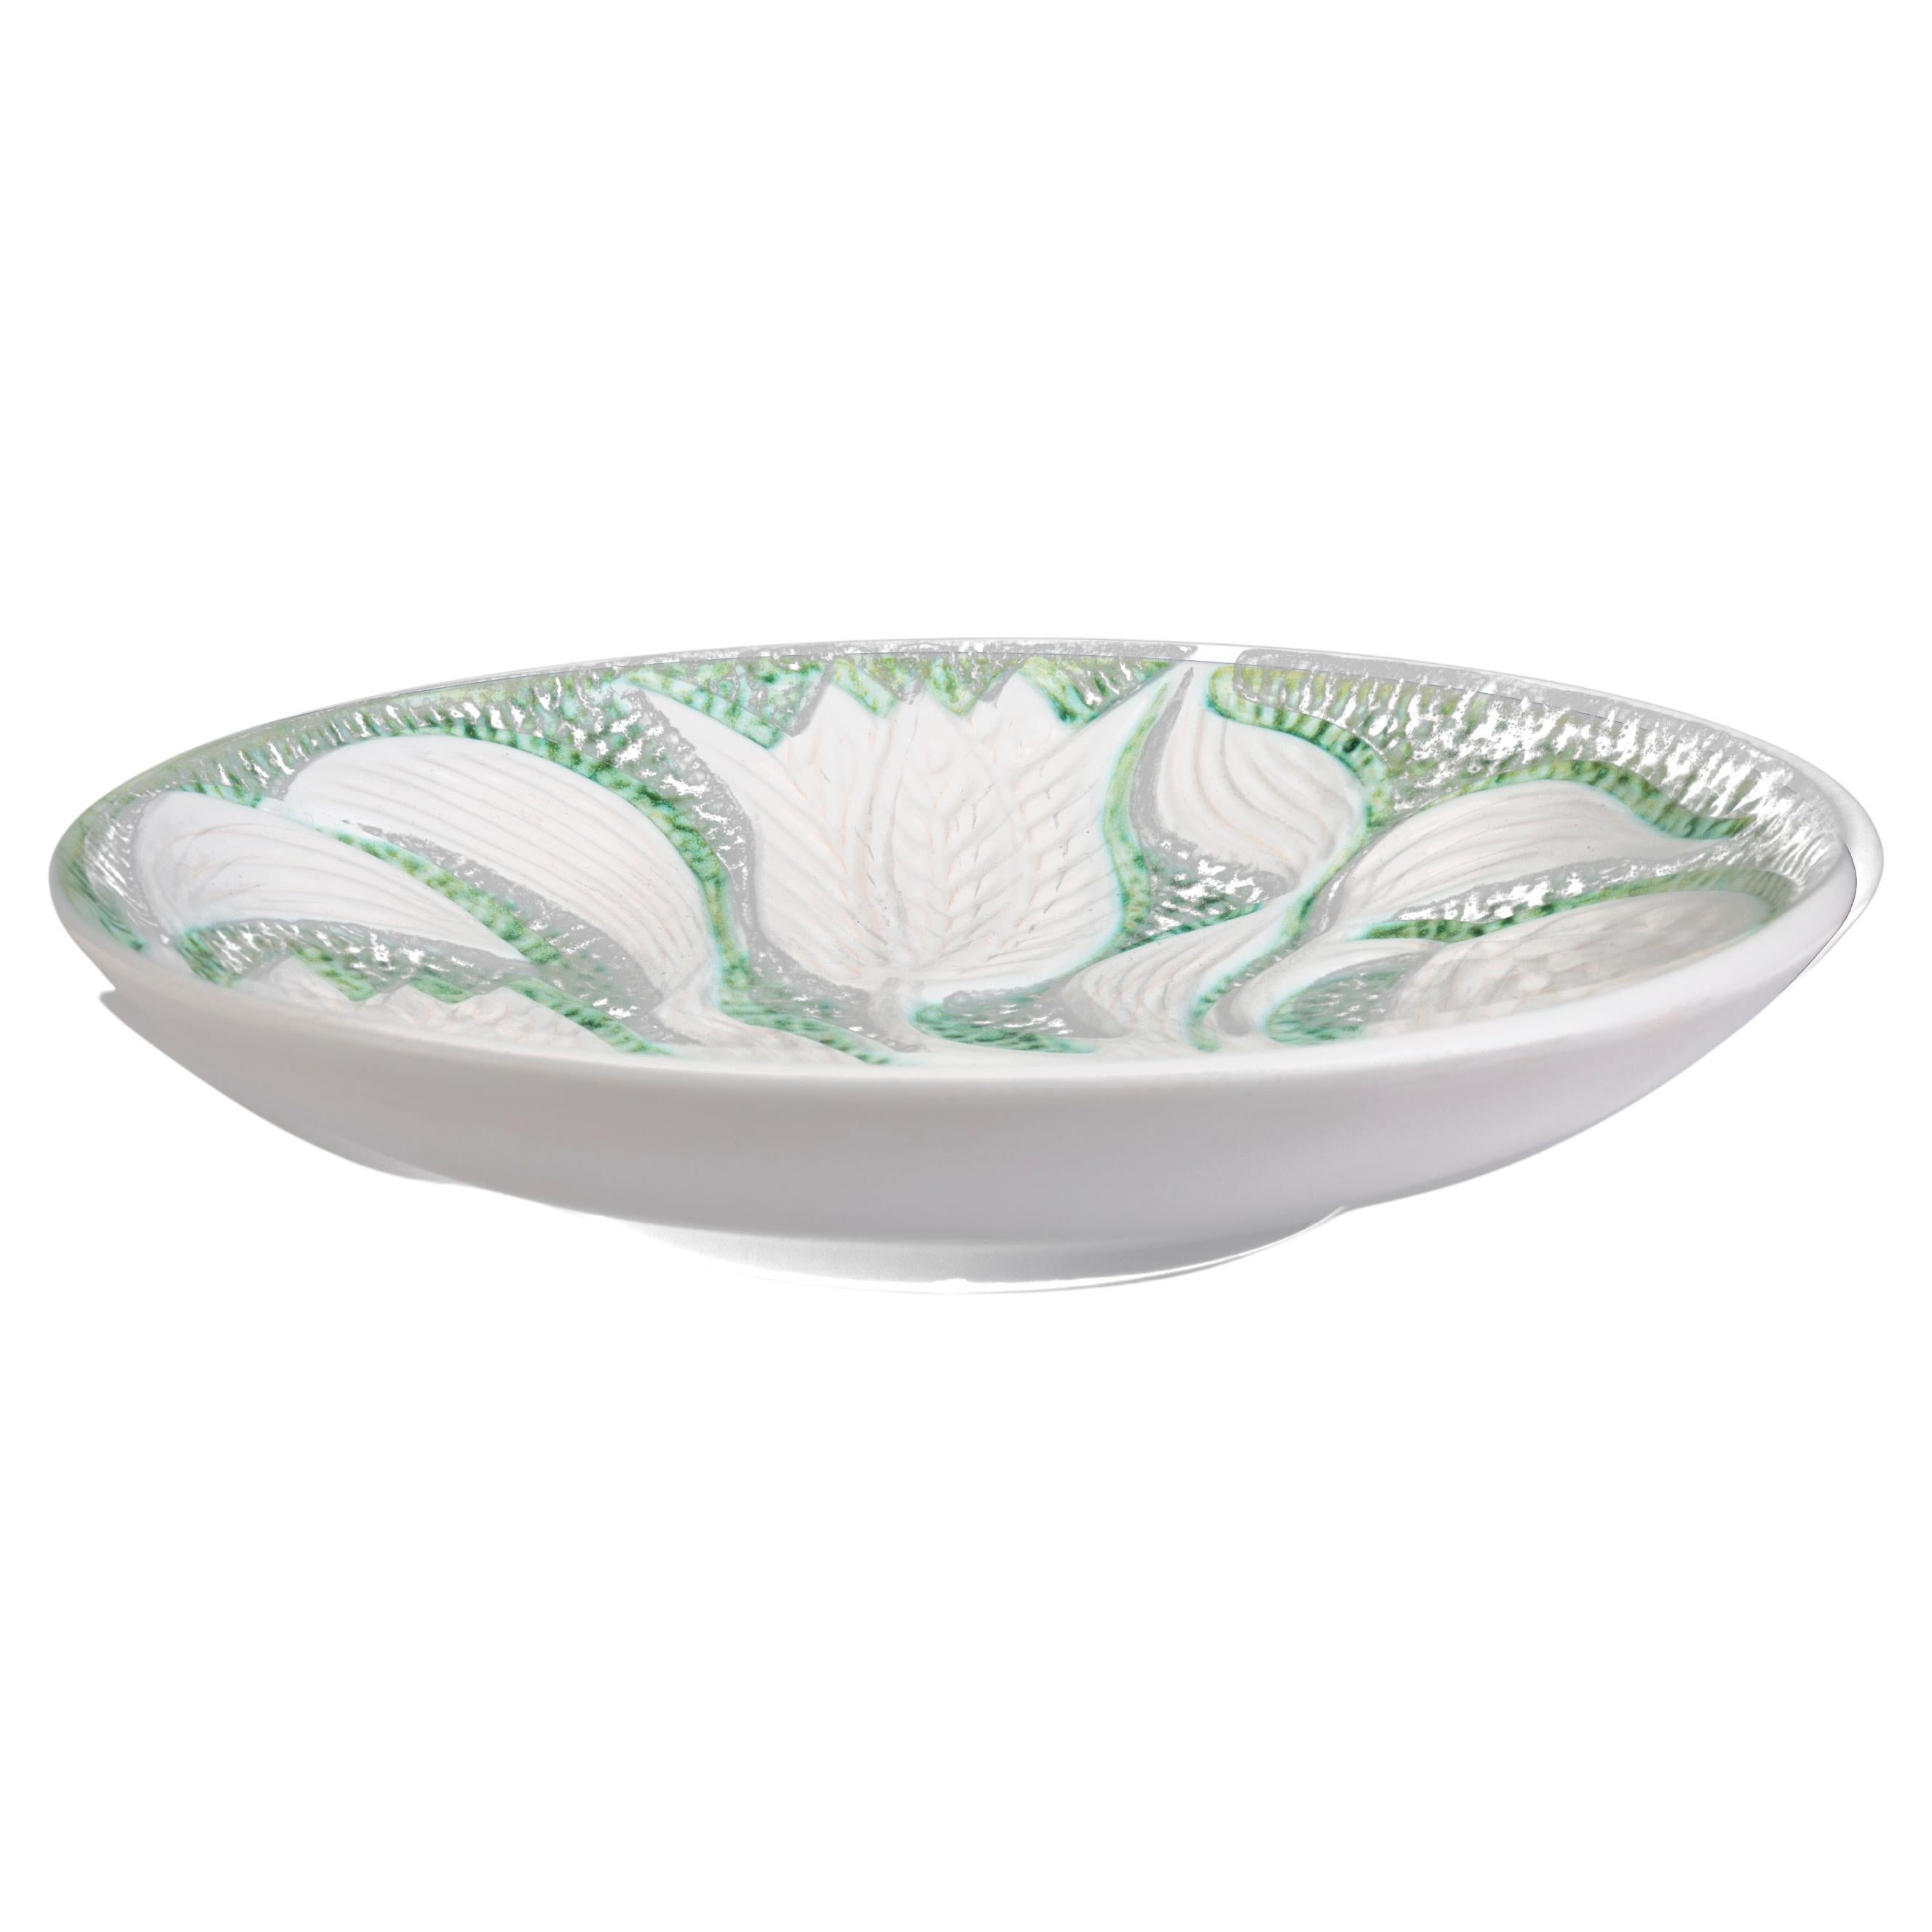 Large dish decorated with serpentine flowers and glazed in white and light green For Sale